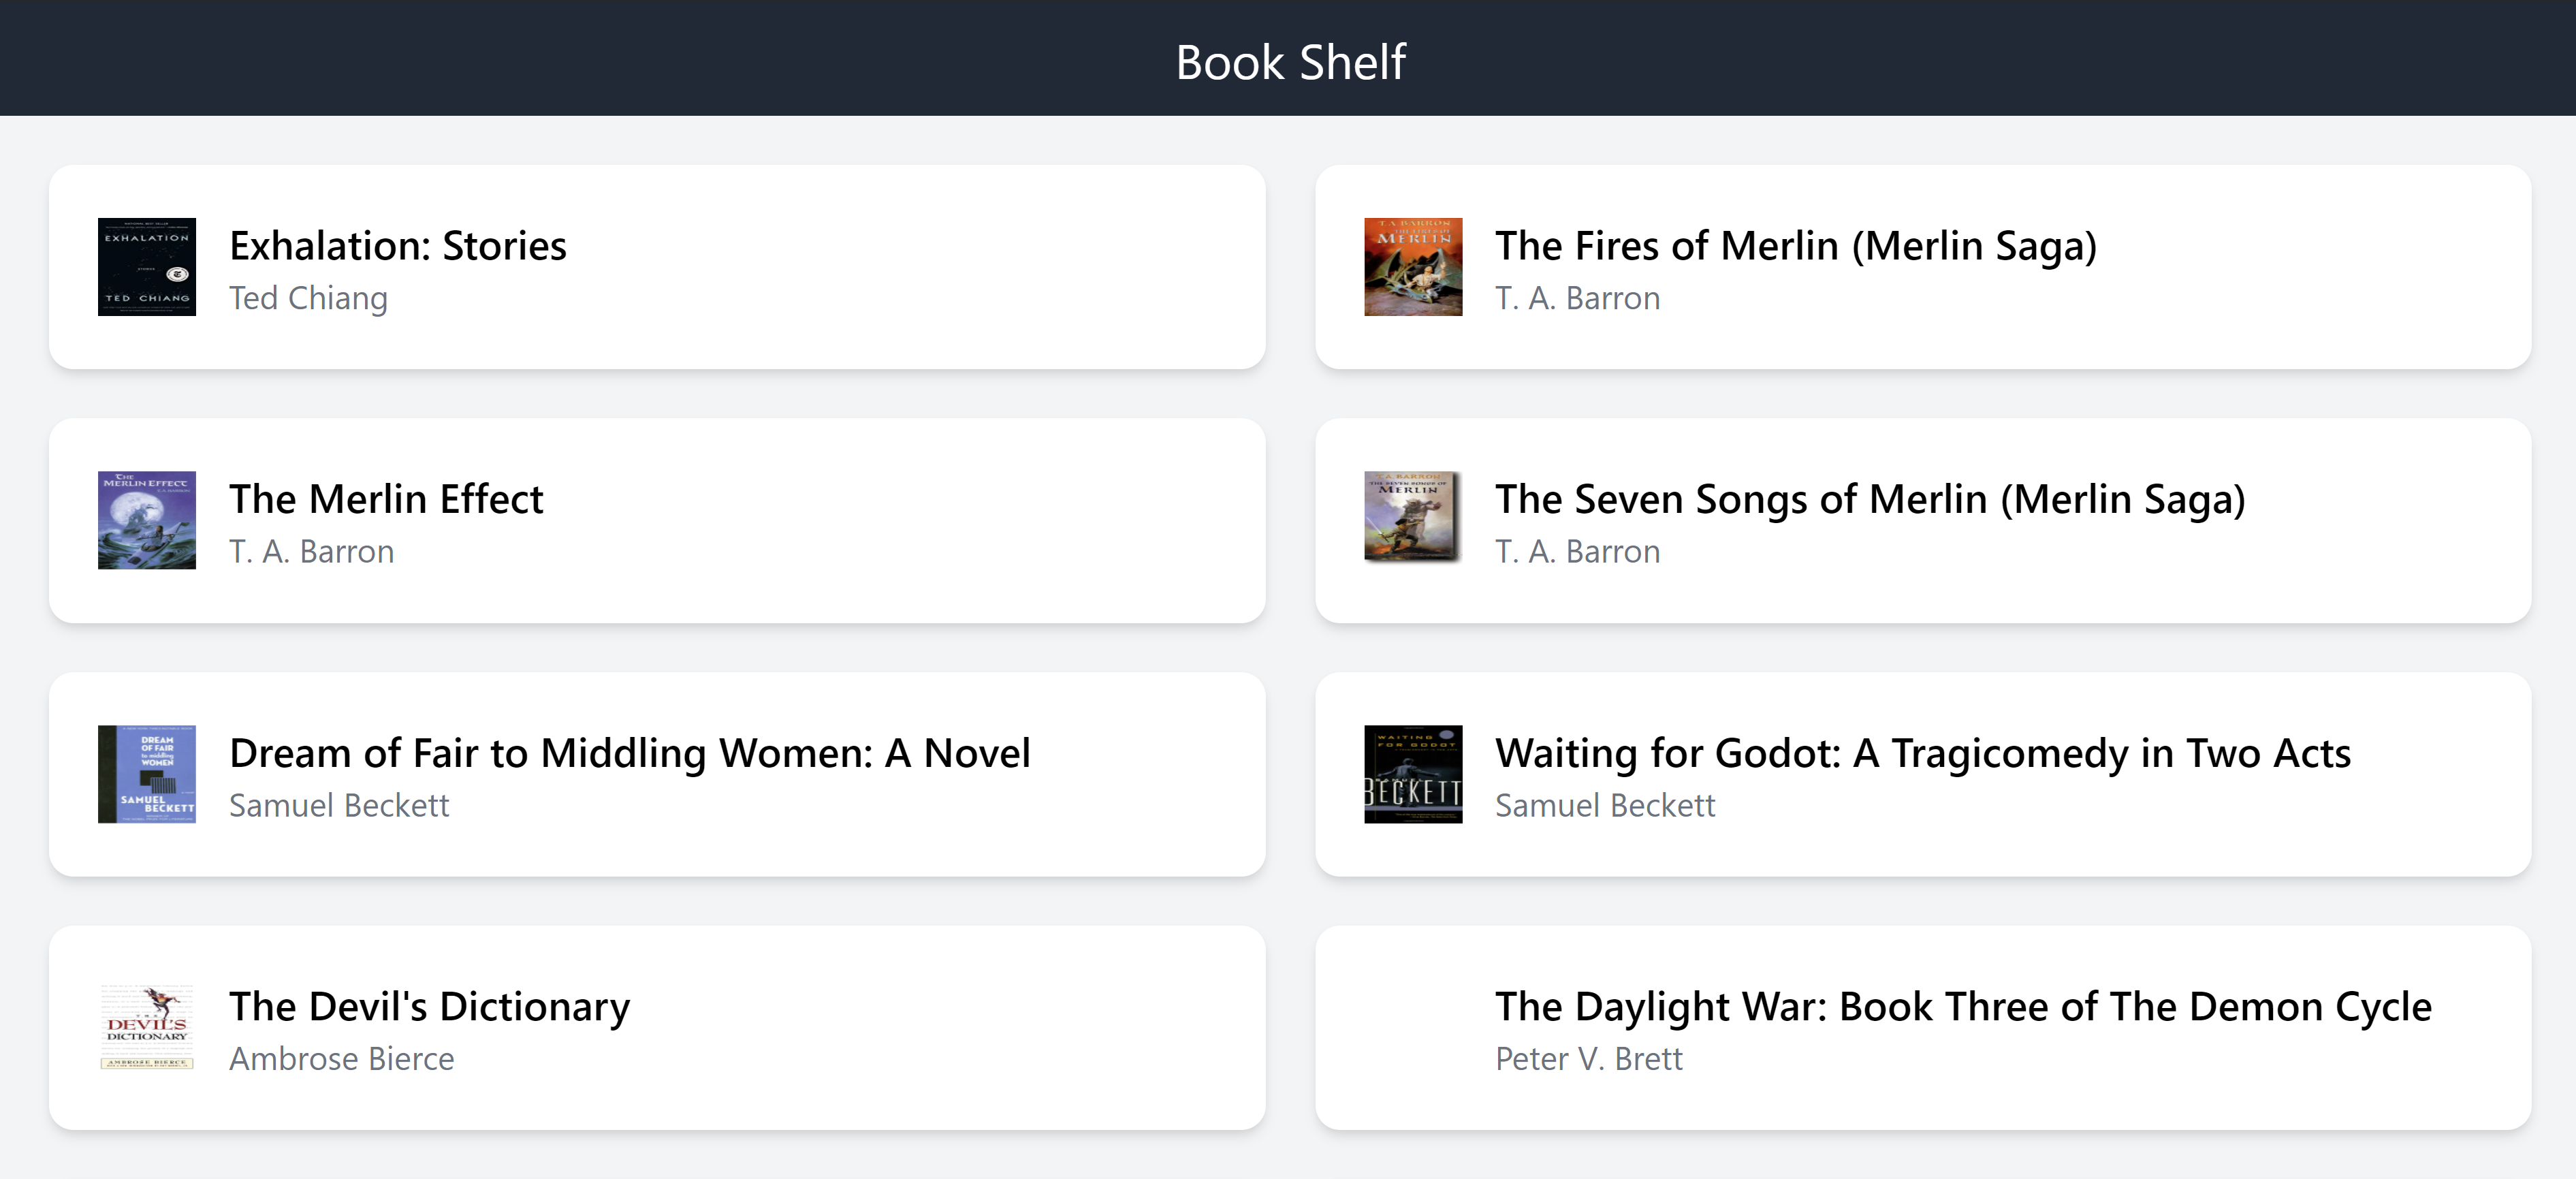 Screenshot of the book shelf page. shows a list of books from the library